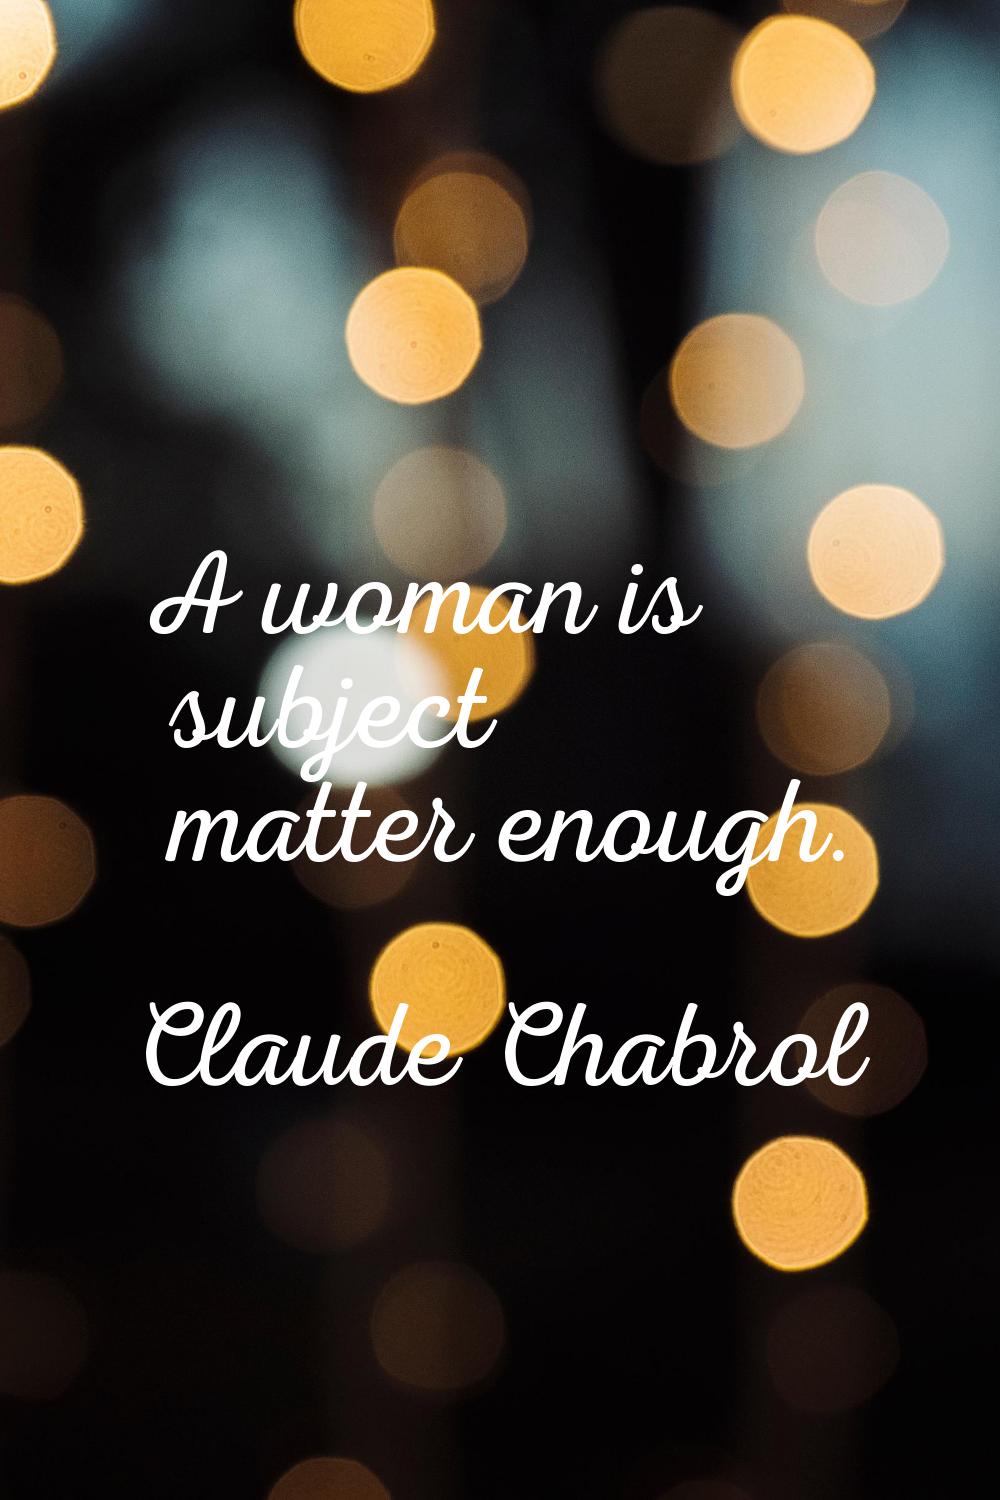 A woman is subject matter enough.